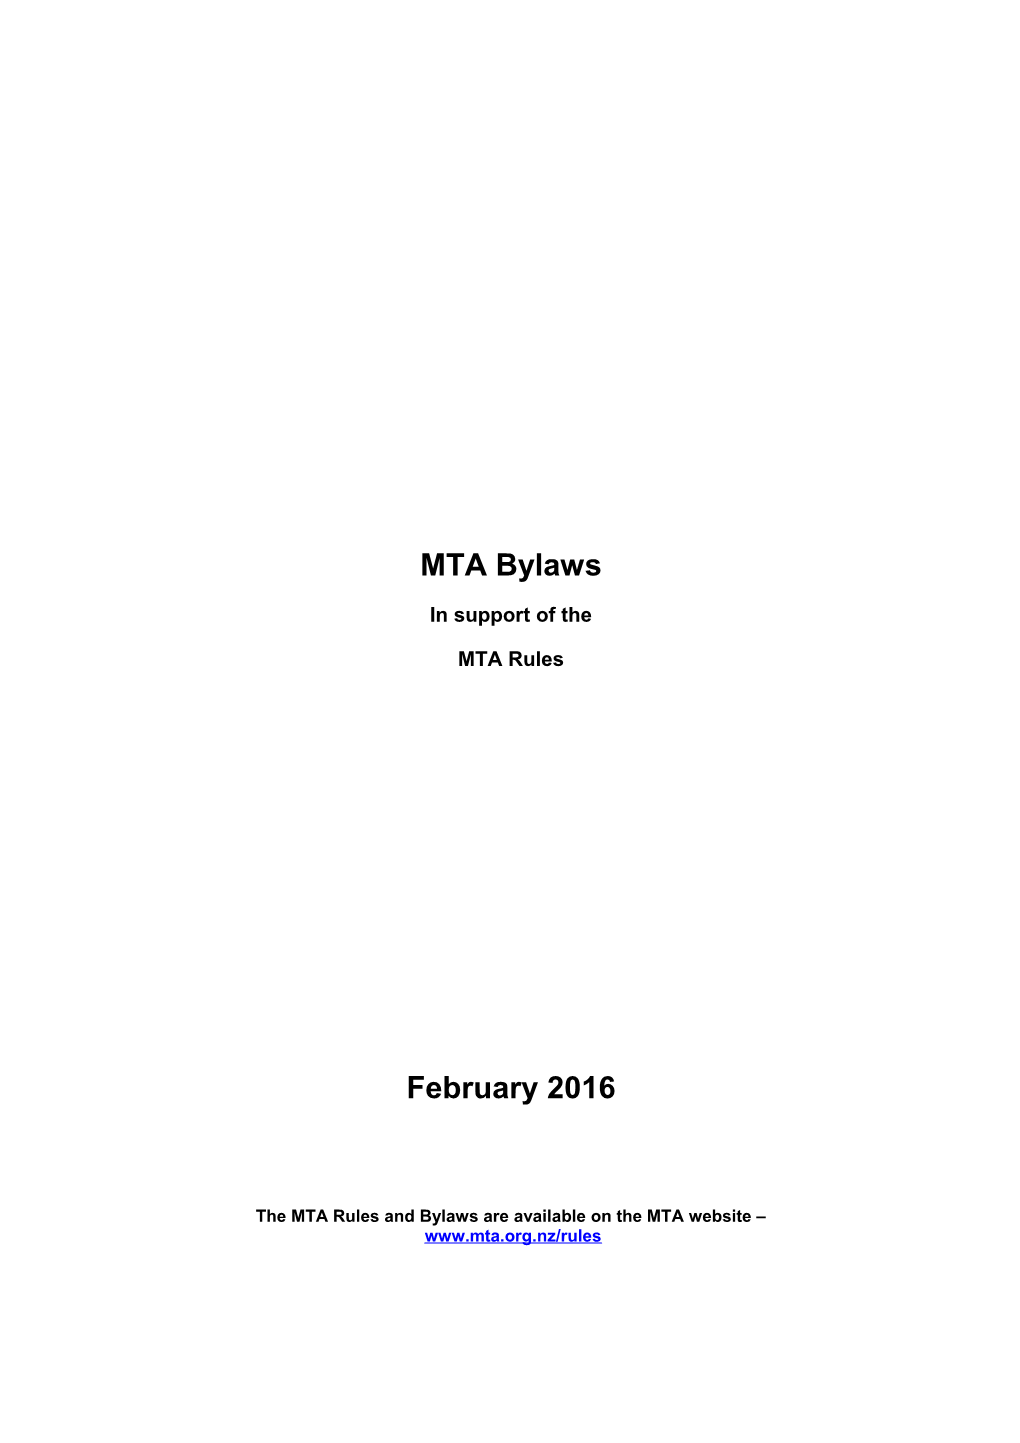 The MTA Rules and Bylaws Are Available on the MTA Website